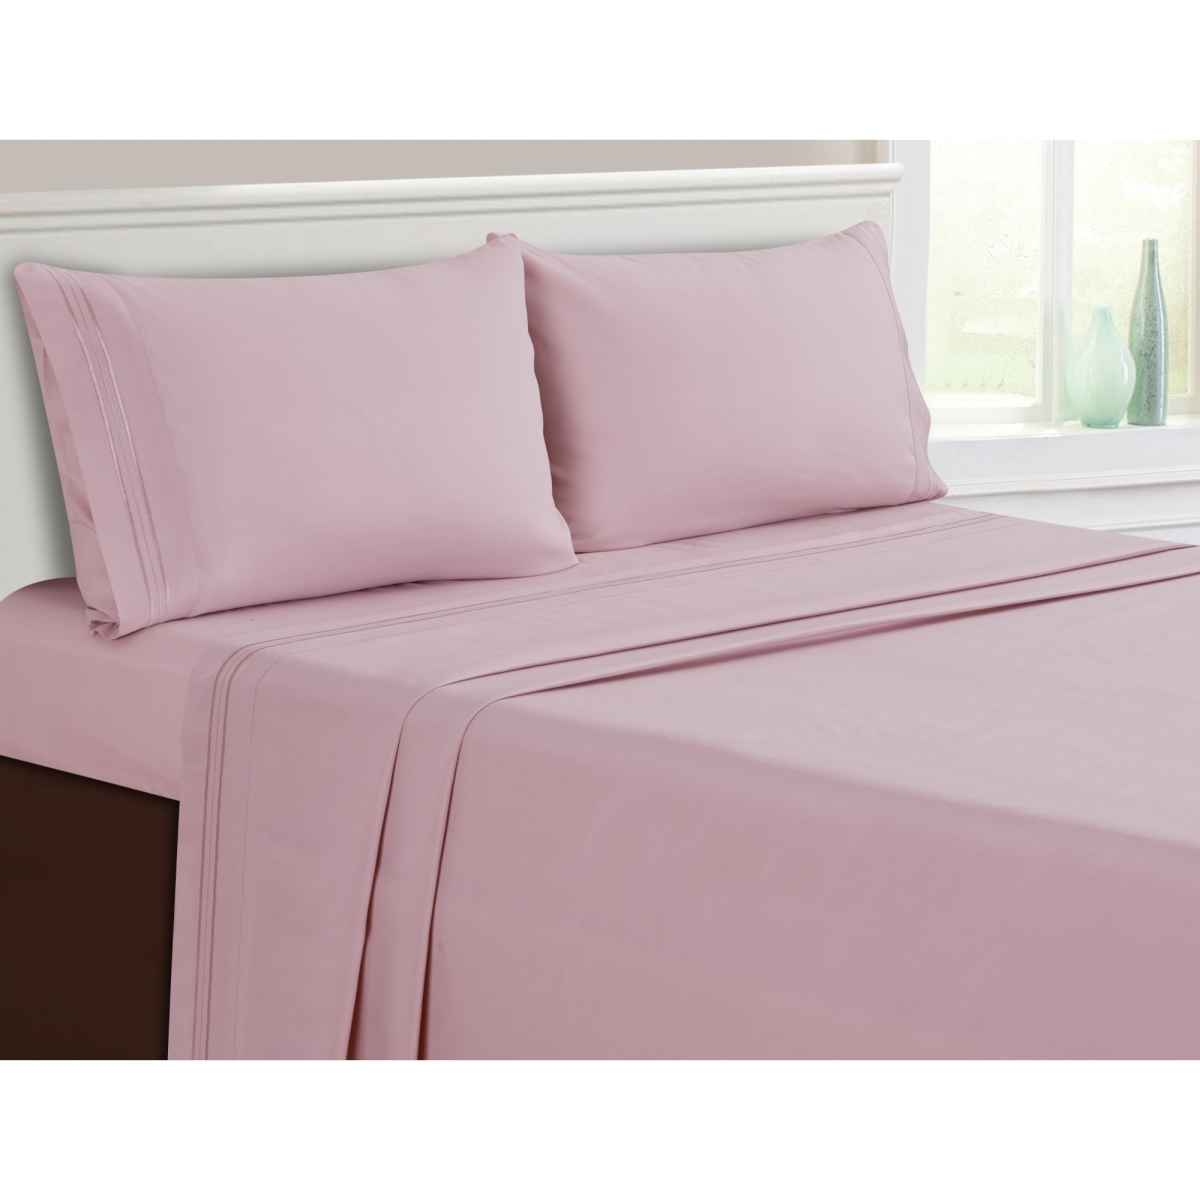 Whtx607-bhk 3-line Embroidered Blush Polyester Sheet Set - King Size - 4 Piece